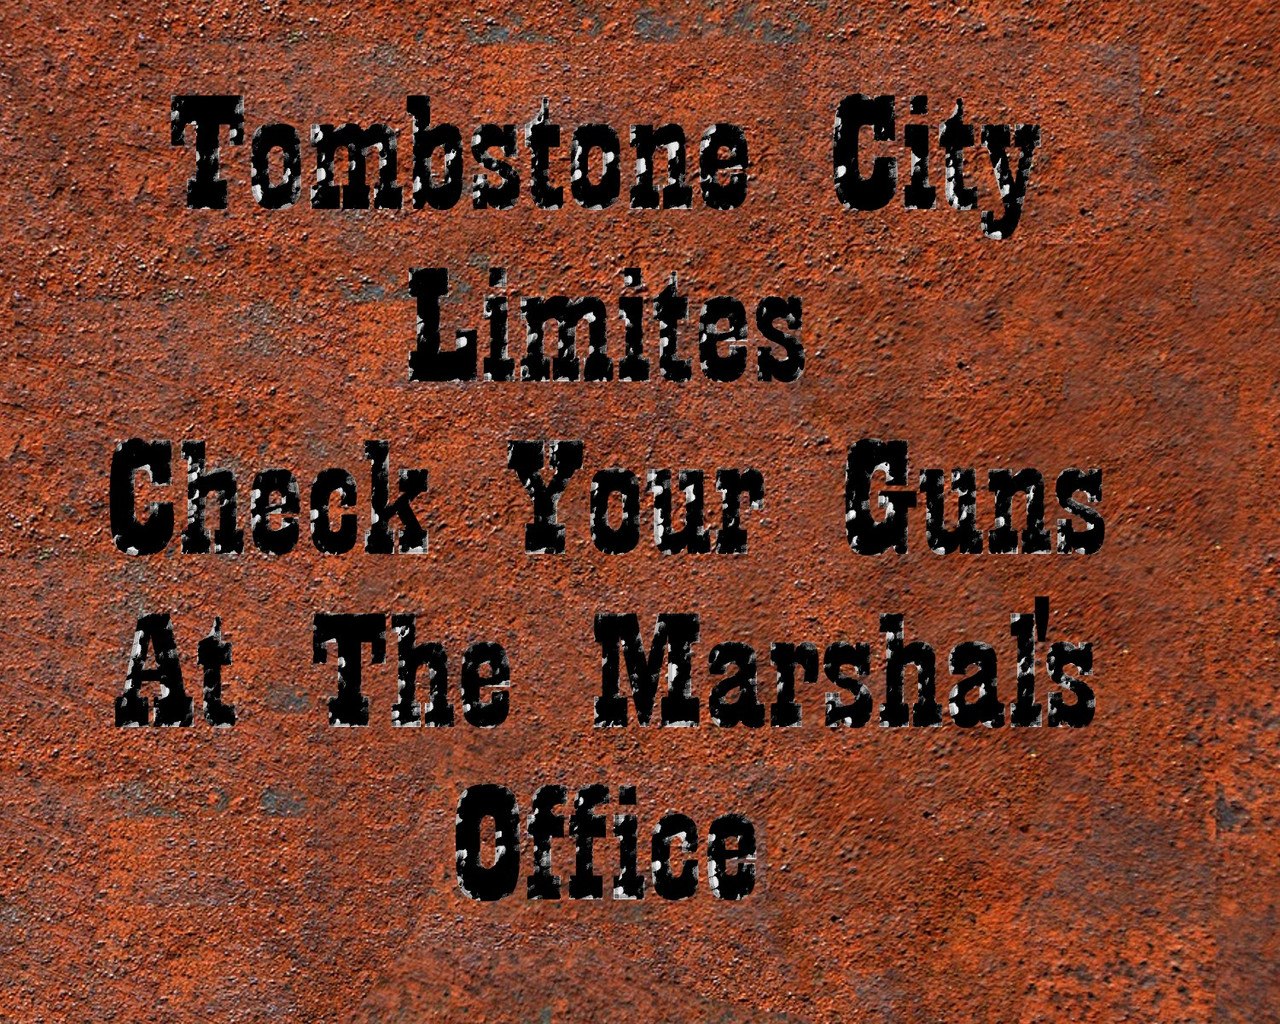 NEW Tombstone city limits check your guns